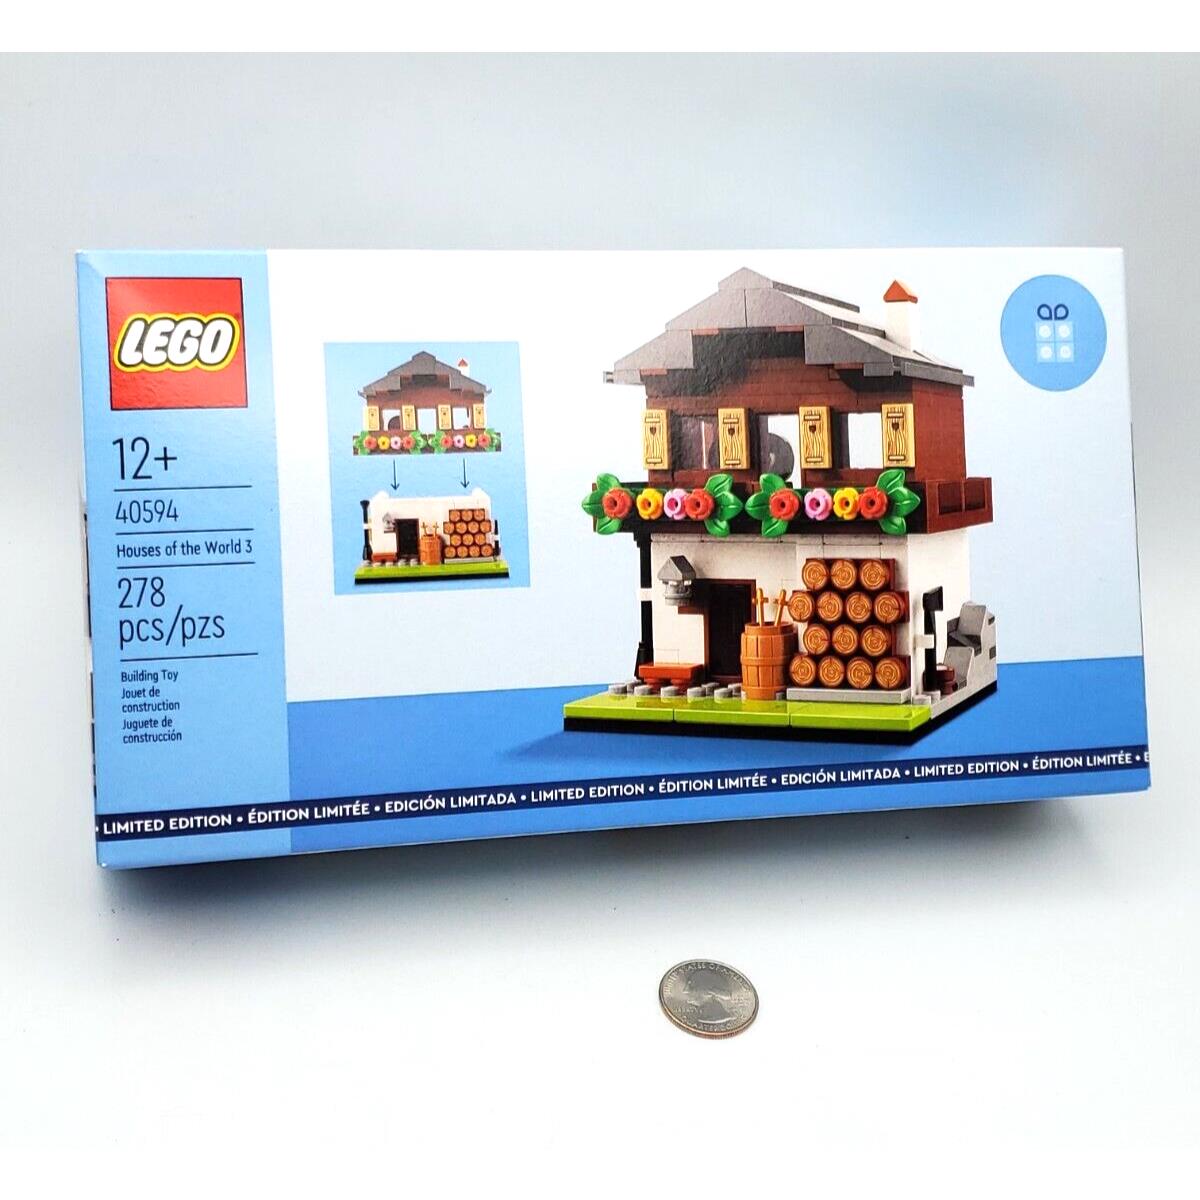 Lego 40594 Houses of The World 3 Set - - Limited Edition Gwp Promo 278 Pcs